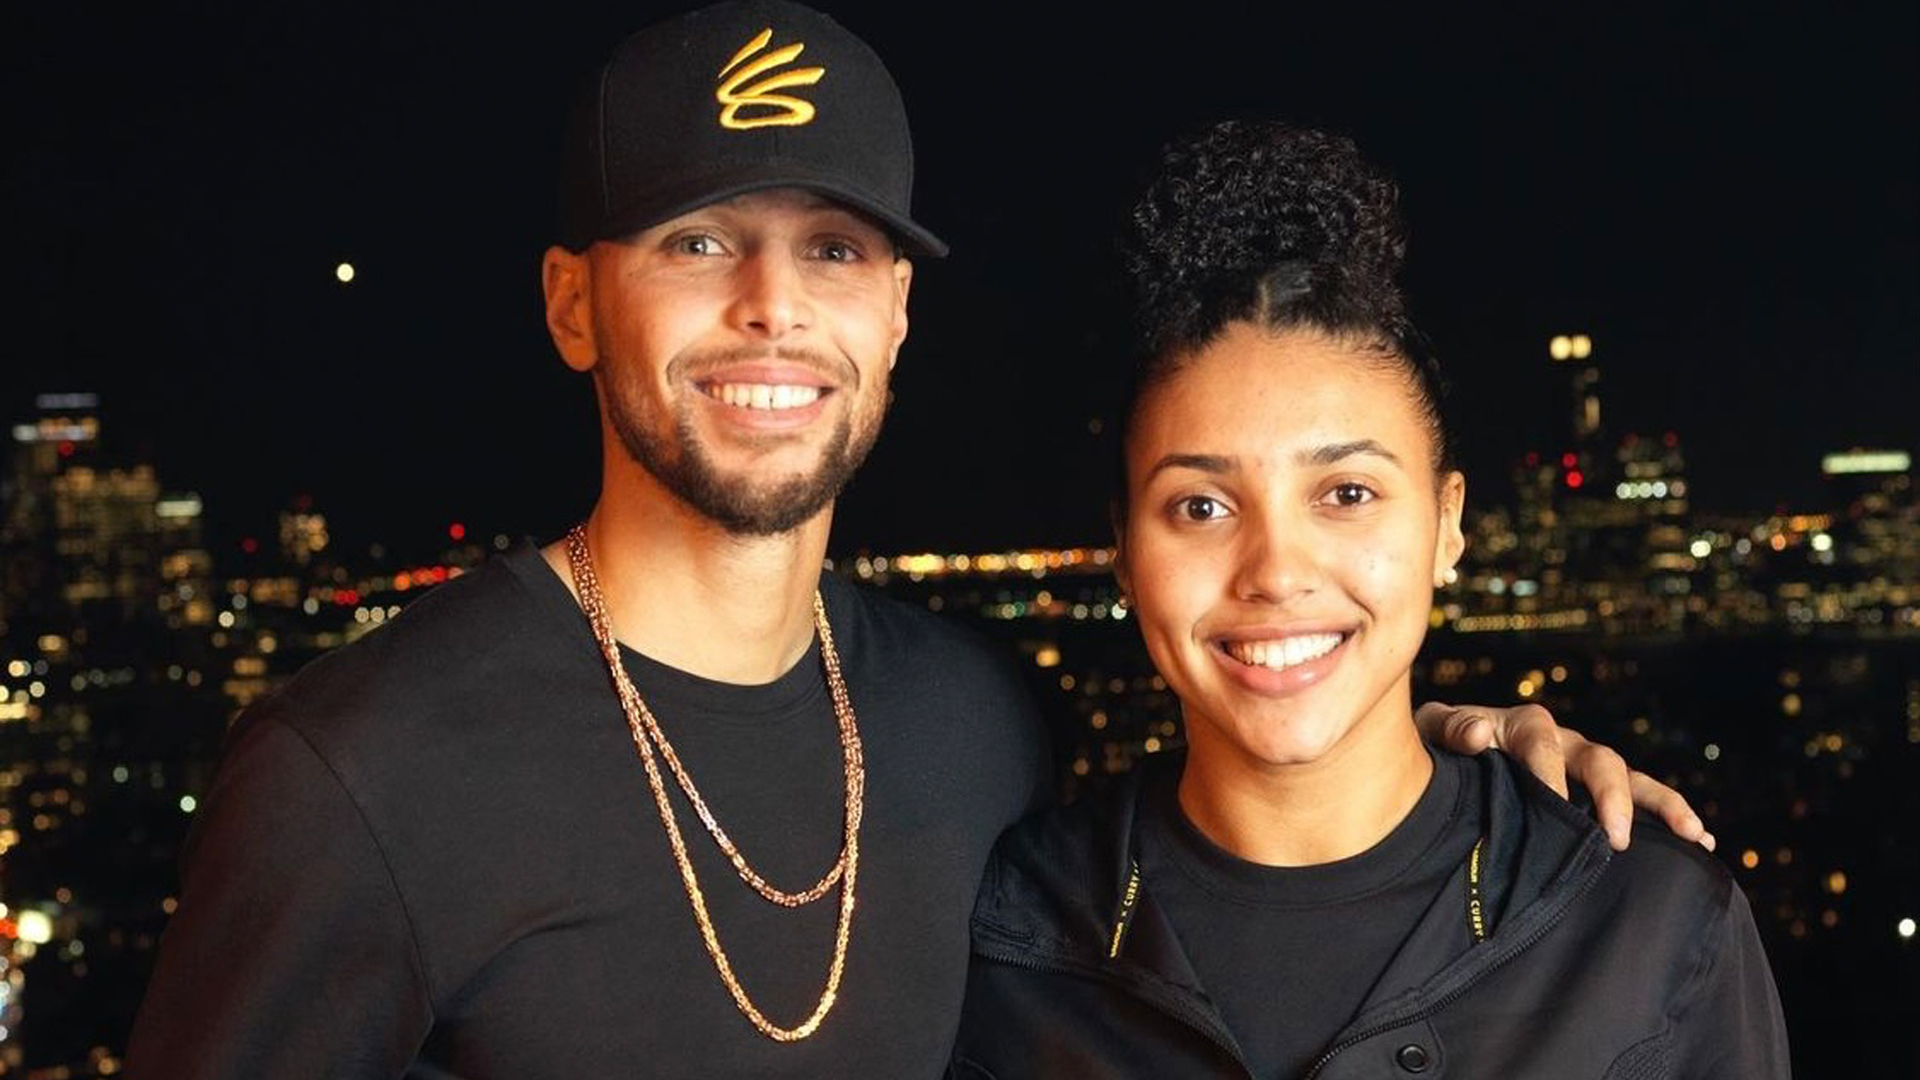 Stephen Curry Becomes First NBA Player To Endorse A College Athlete Under NIL Changes